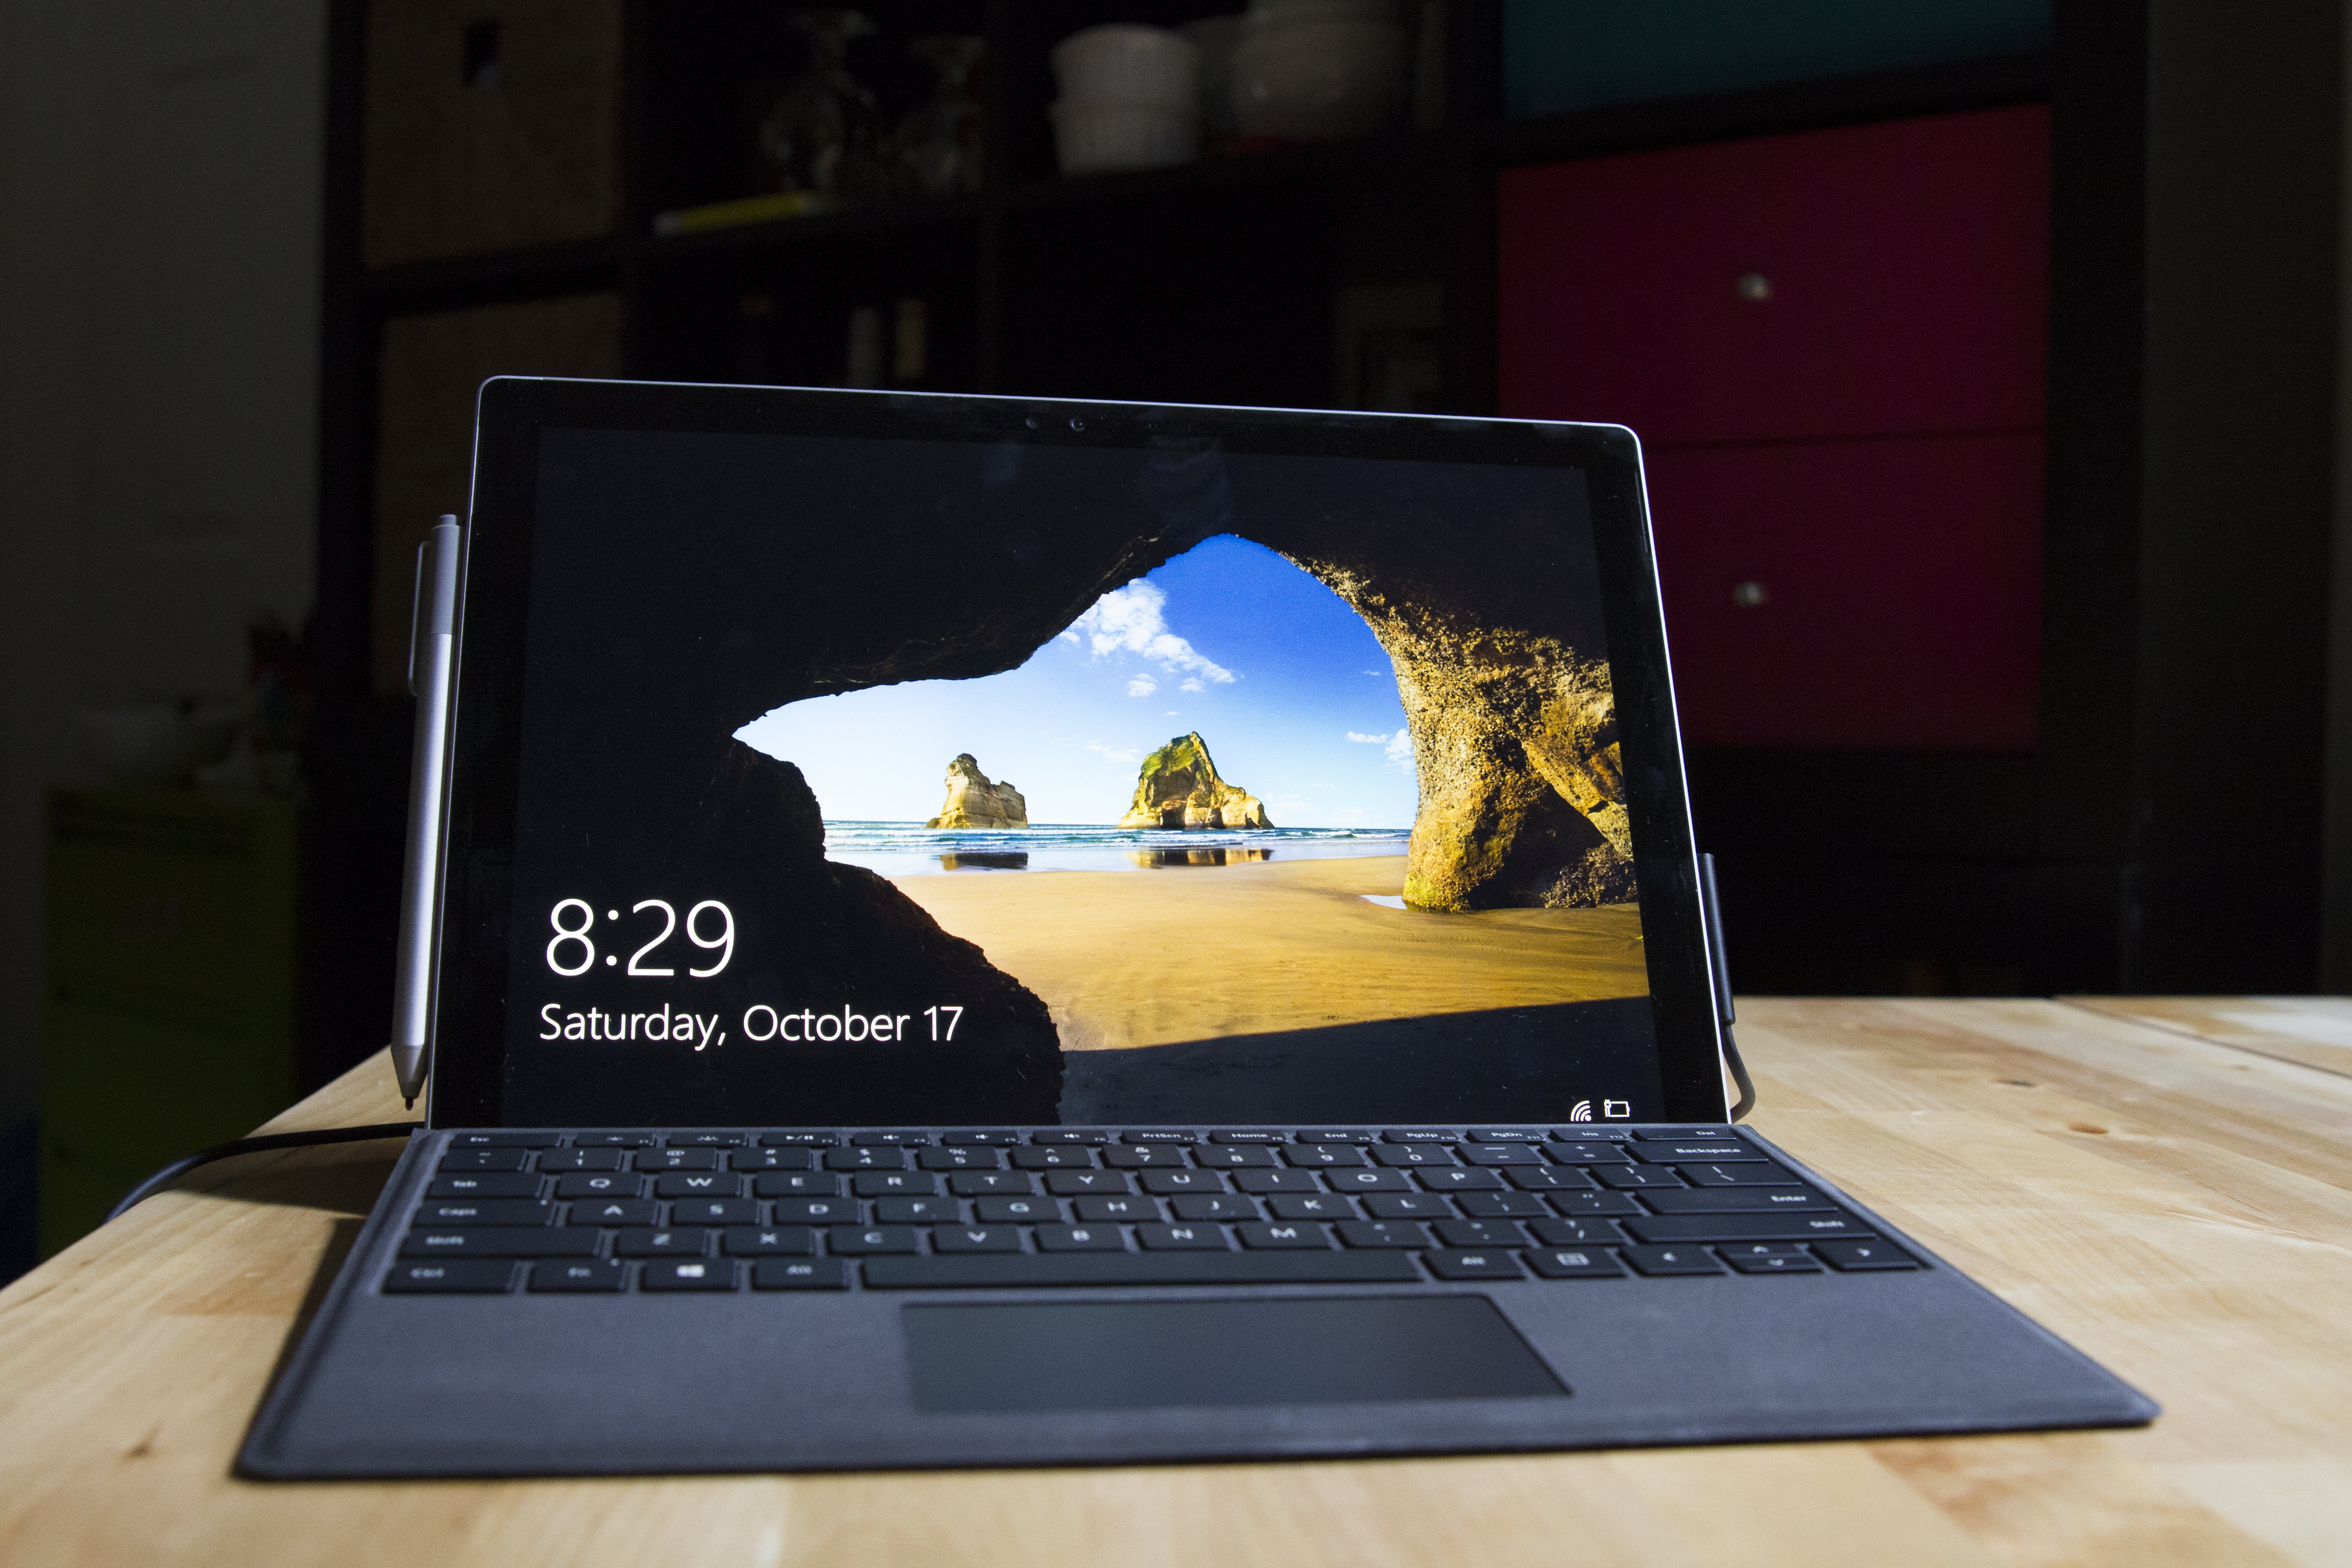 Microsoft Surface Pro 4 review: A refined Surface Pro is still the